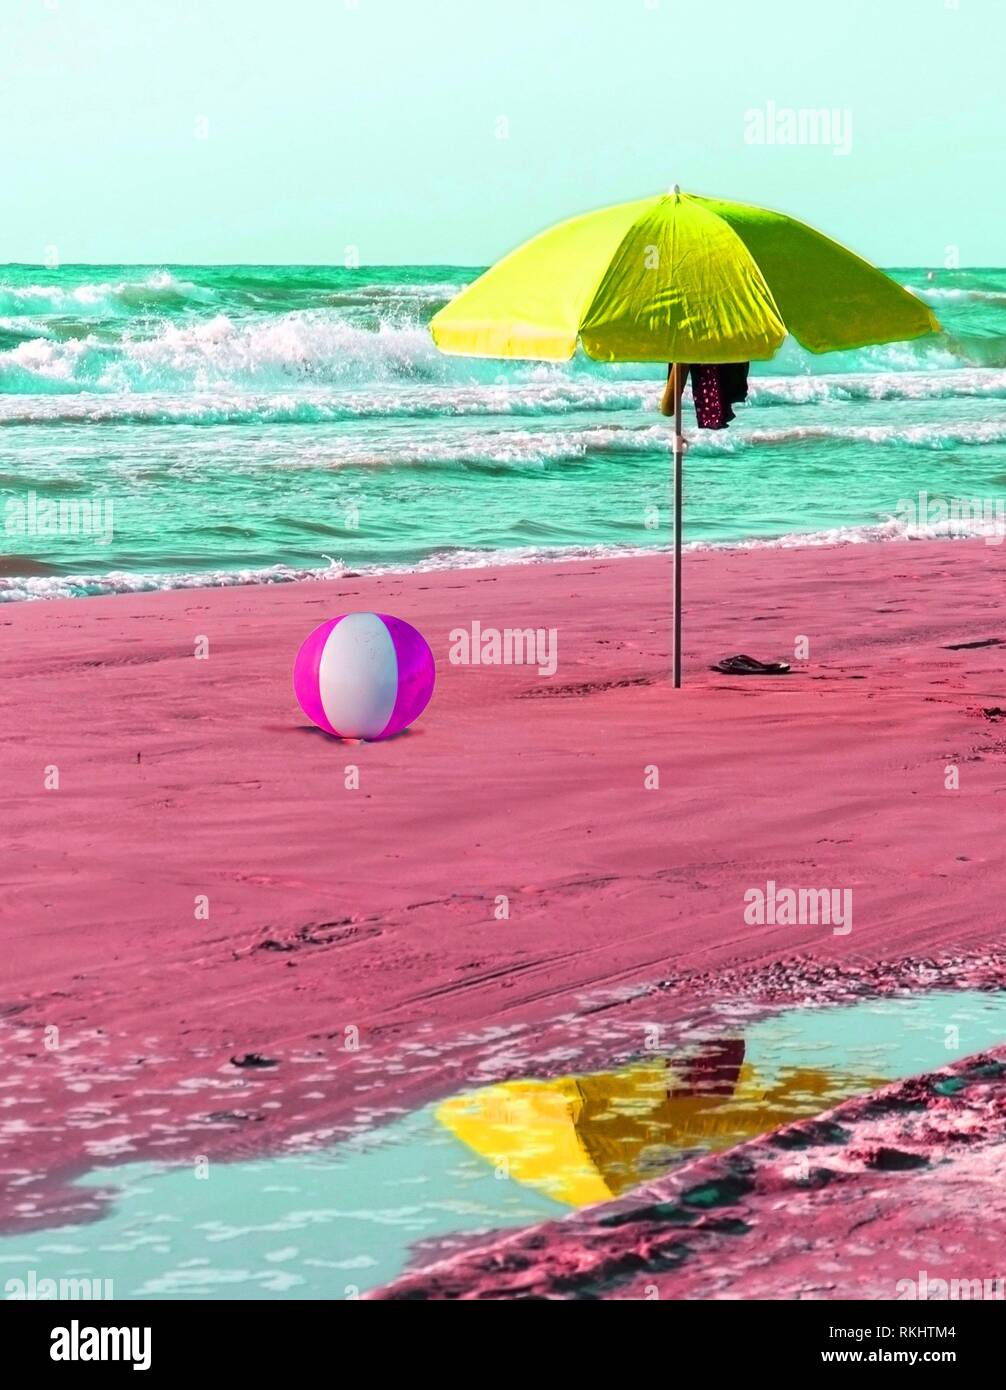 Fun beach concept with parasol, shoes and inflatable ball in surrealistic colours. Stock Photo